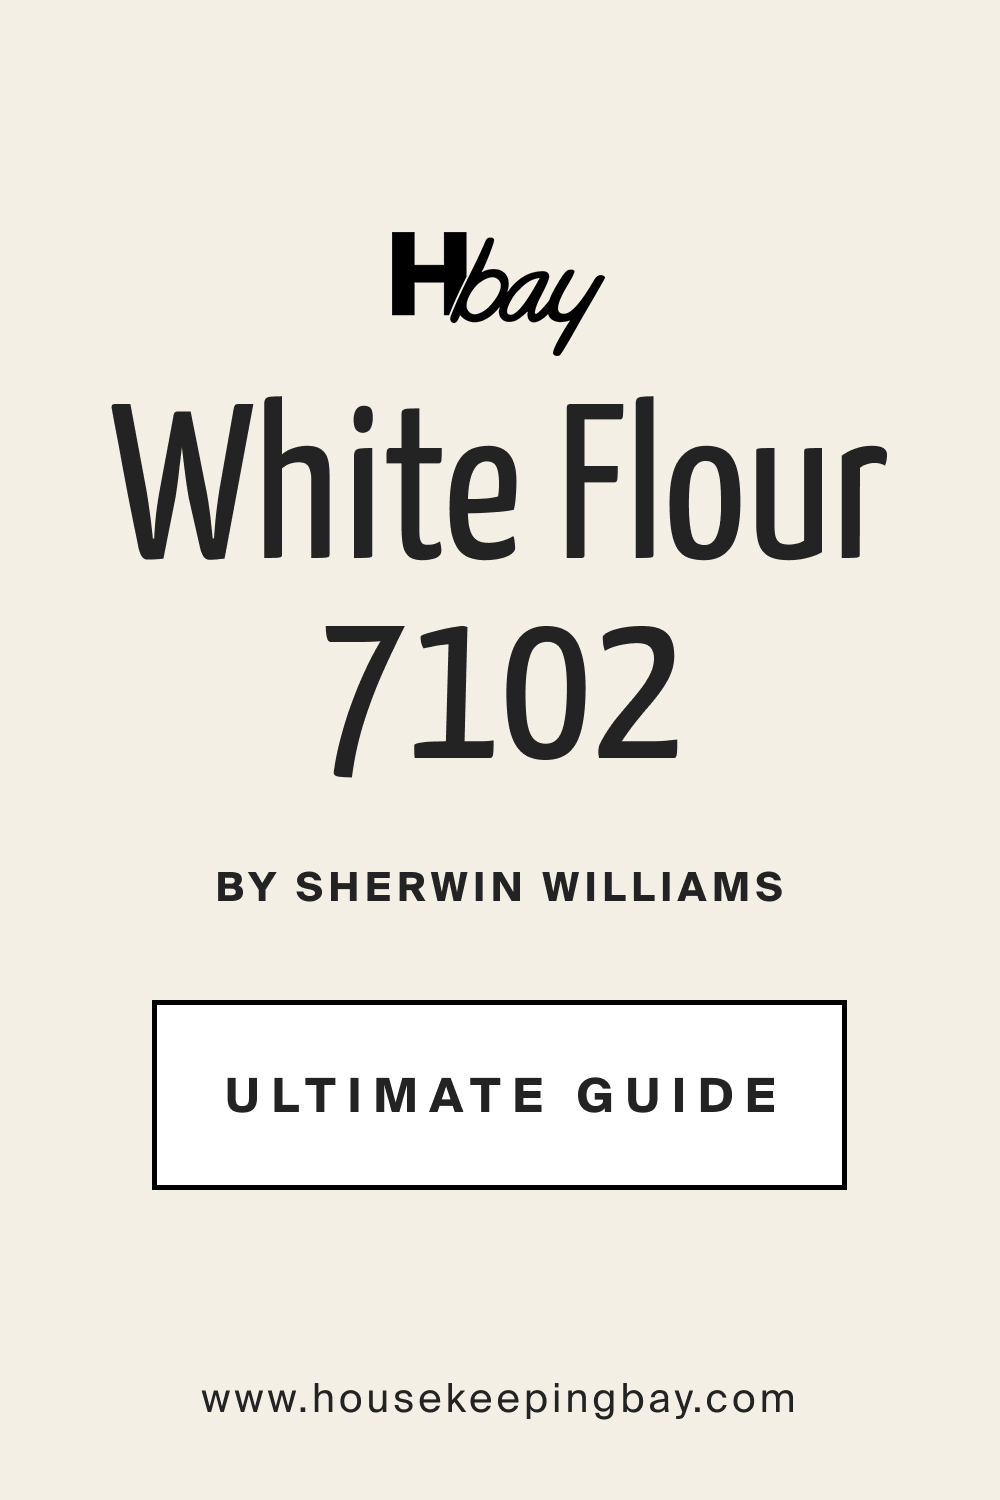 White Flour SW 7102 by Sherwin Williams Ultimate Guide